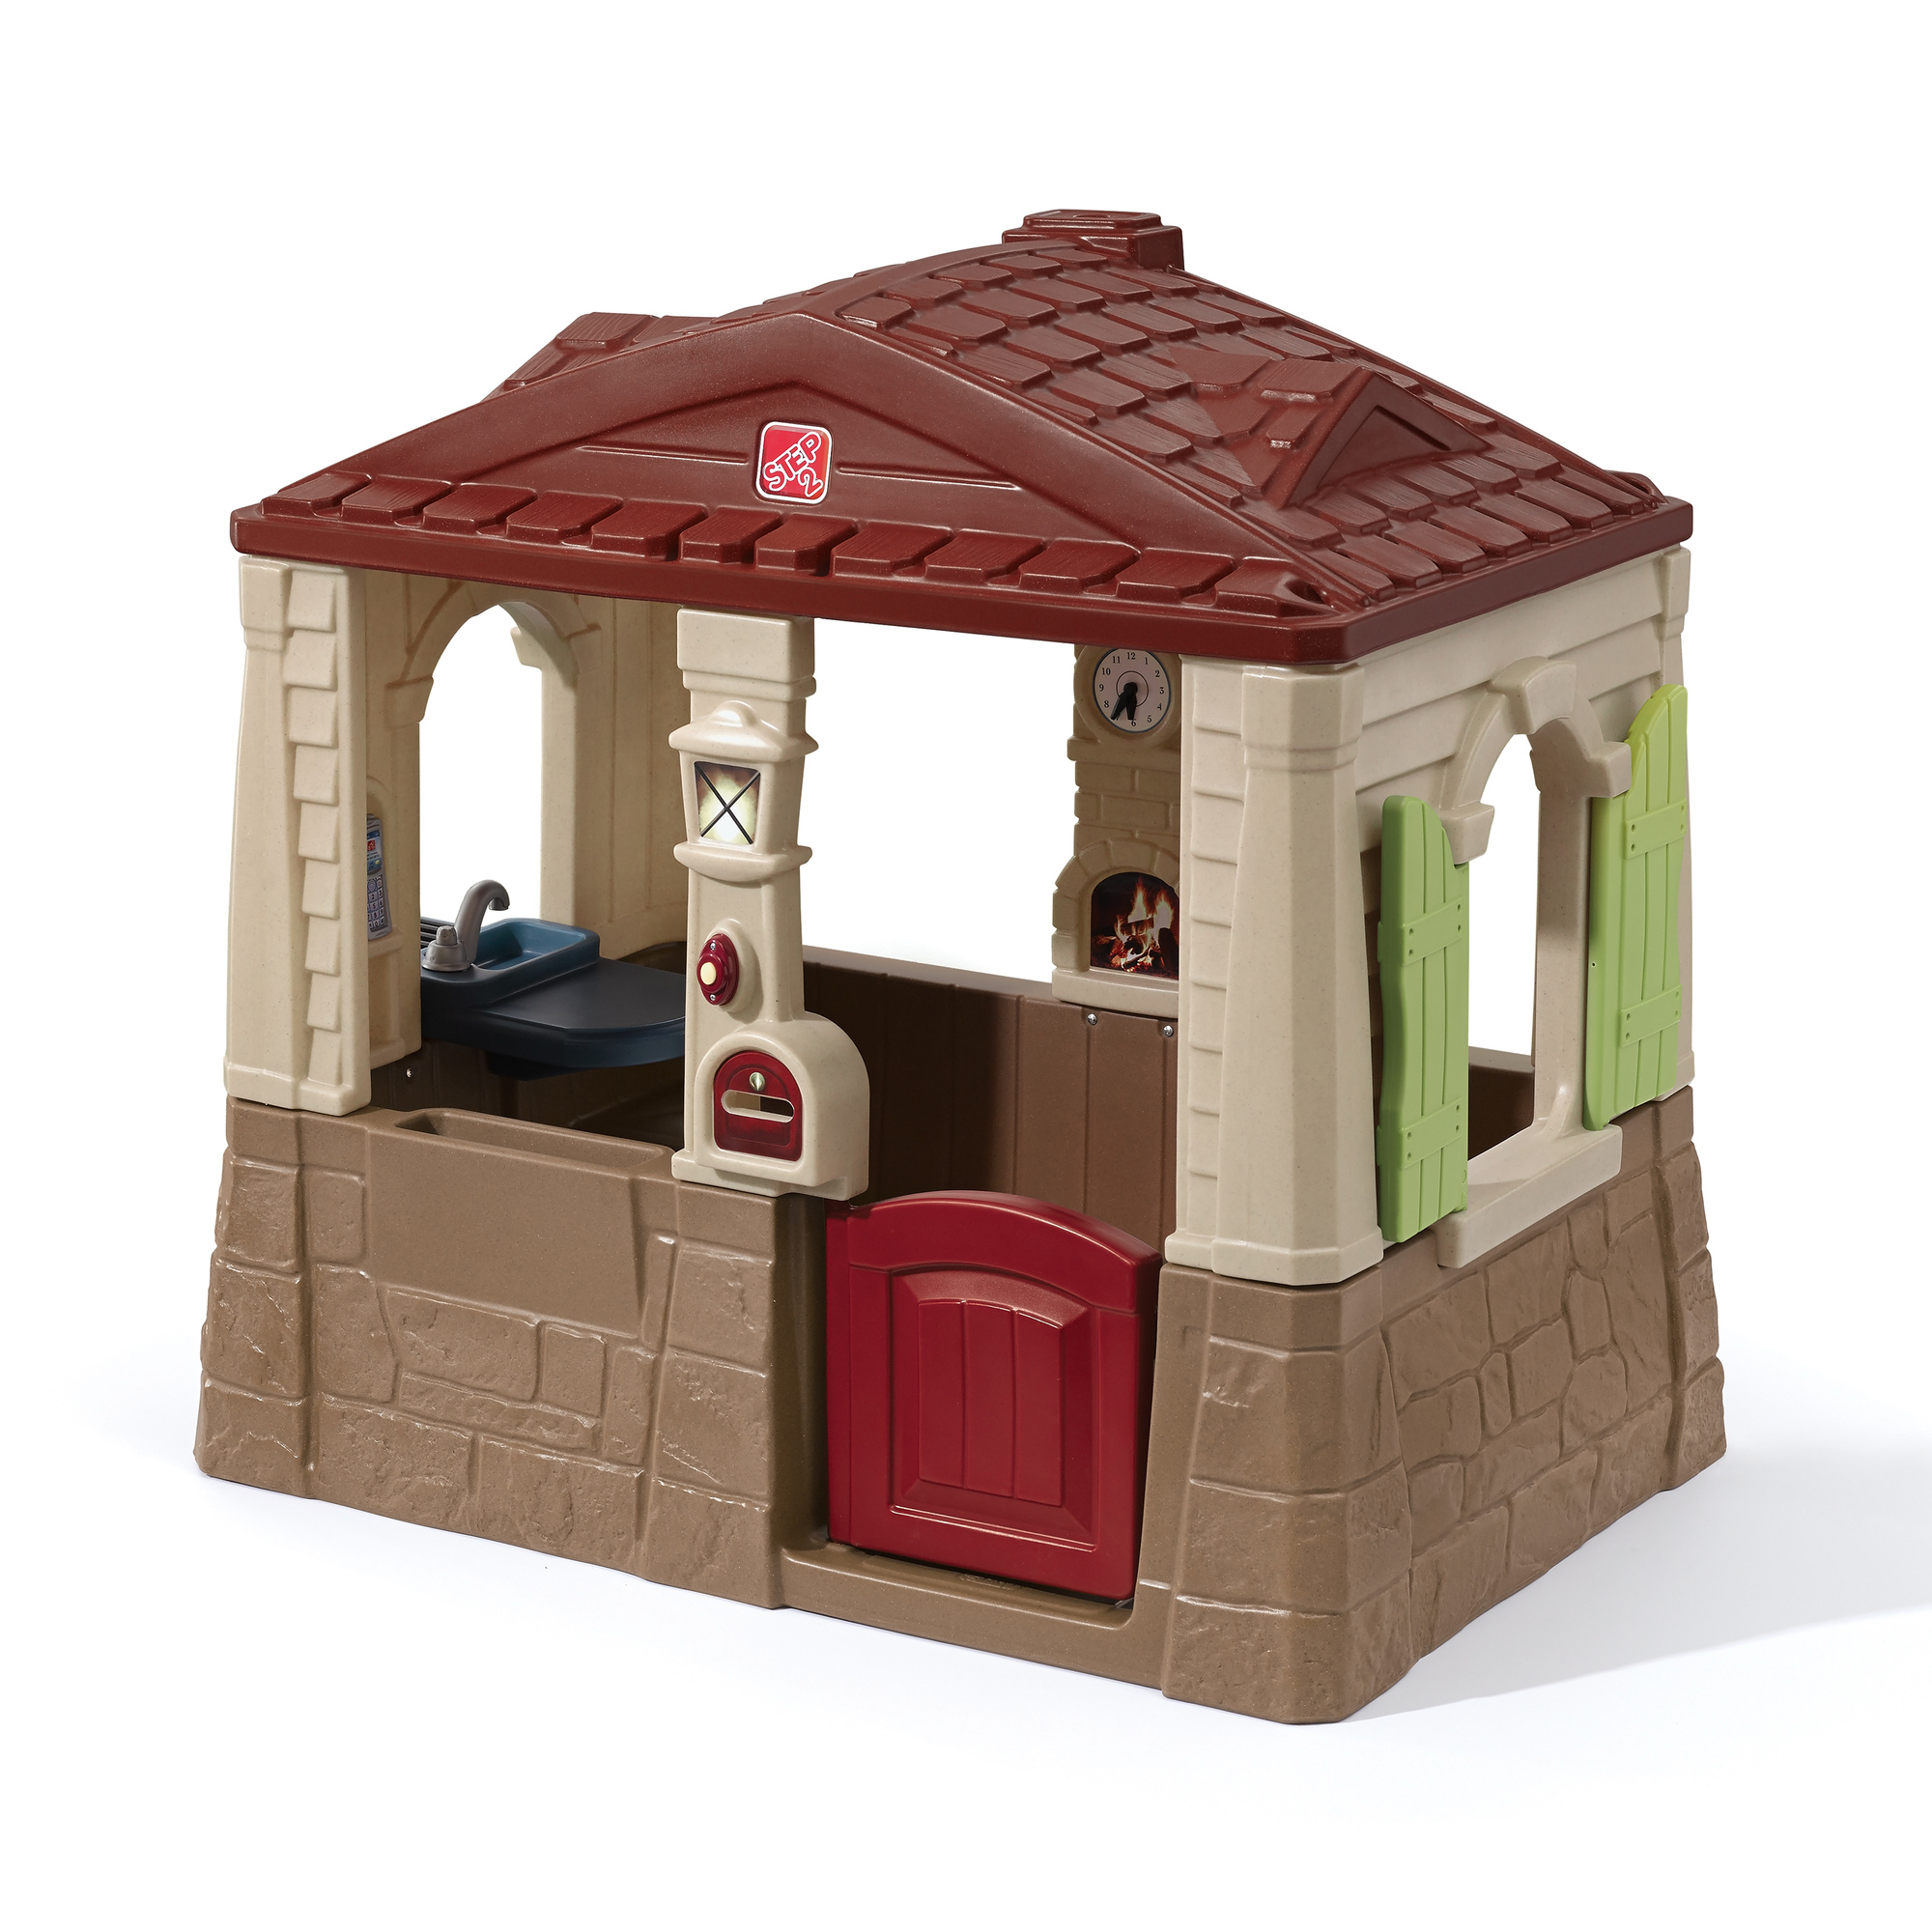 Step2 Neat & Tidy Cottage II Brown Playhouse Plastic Kids Outdoor Toy - image 1 of 9